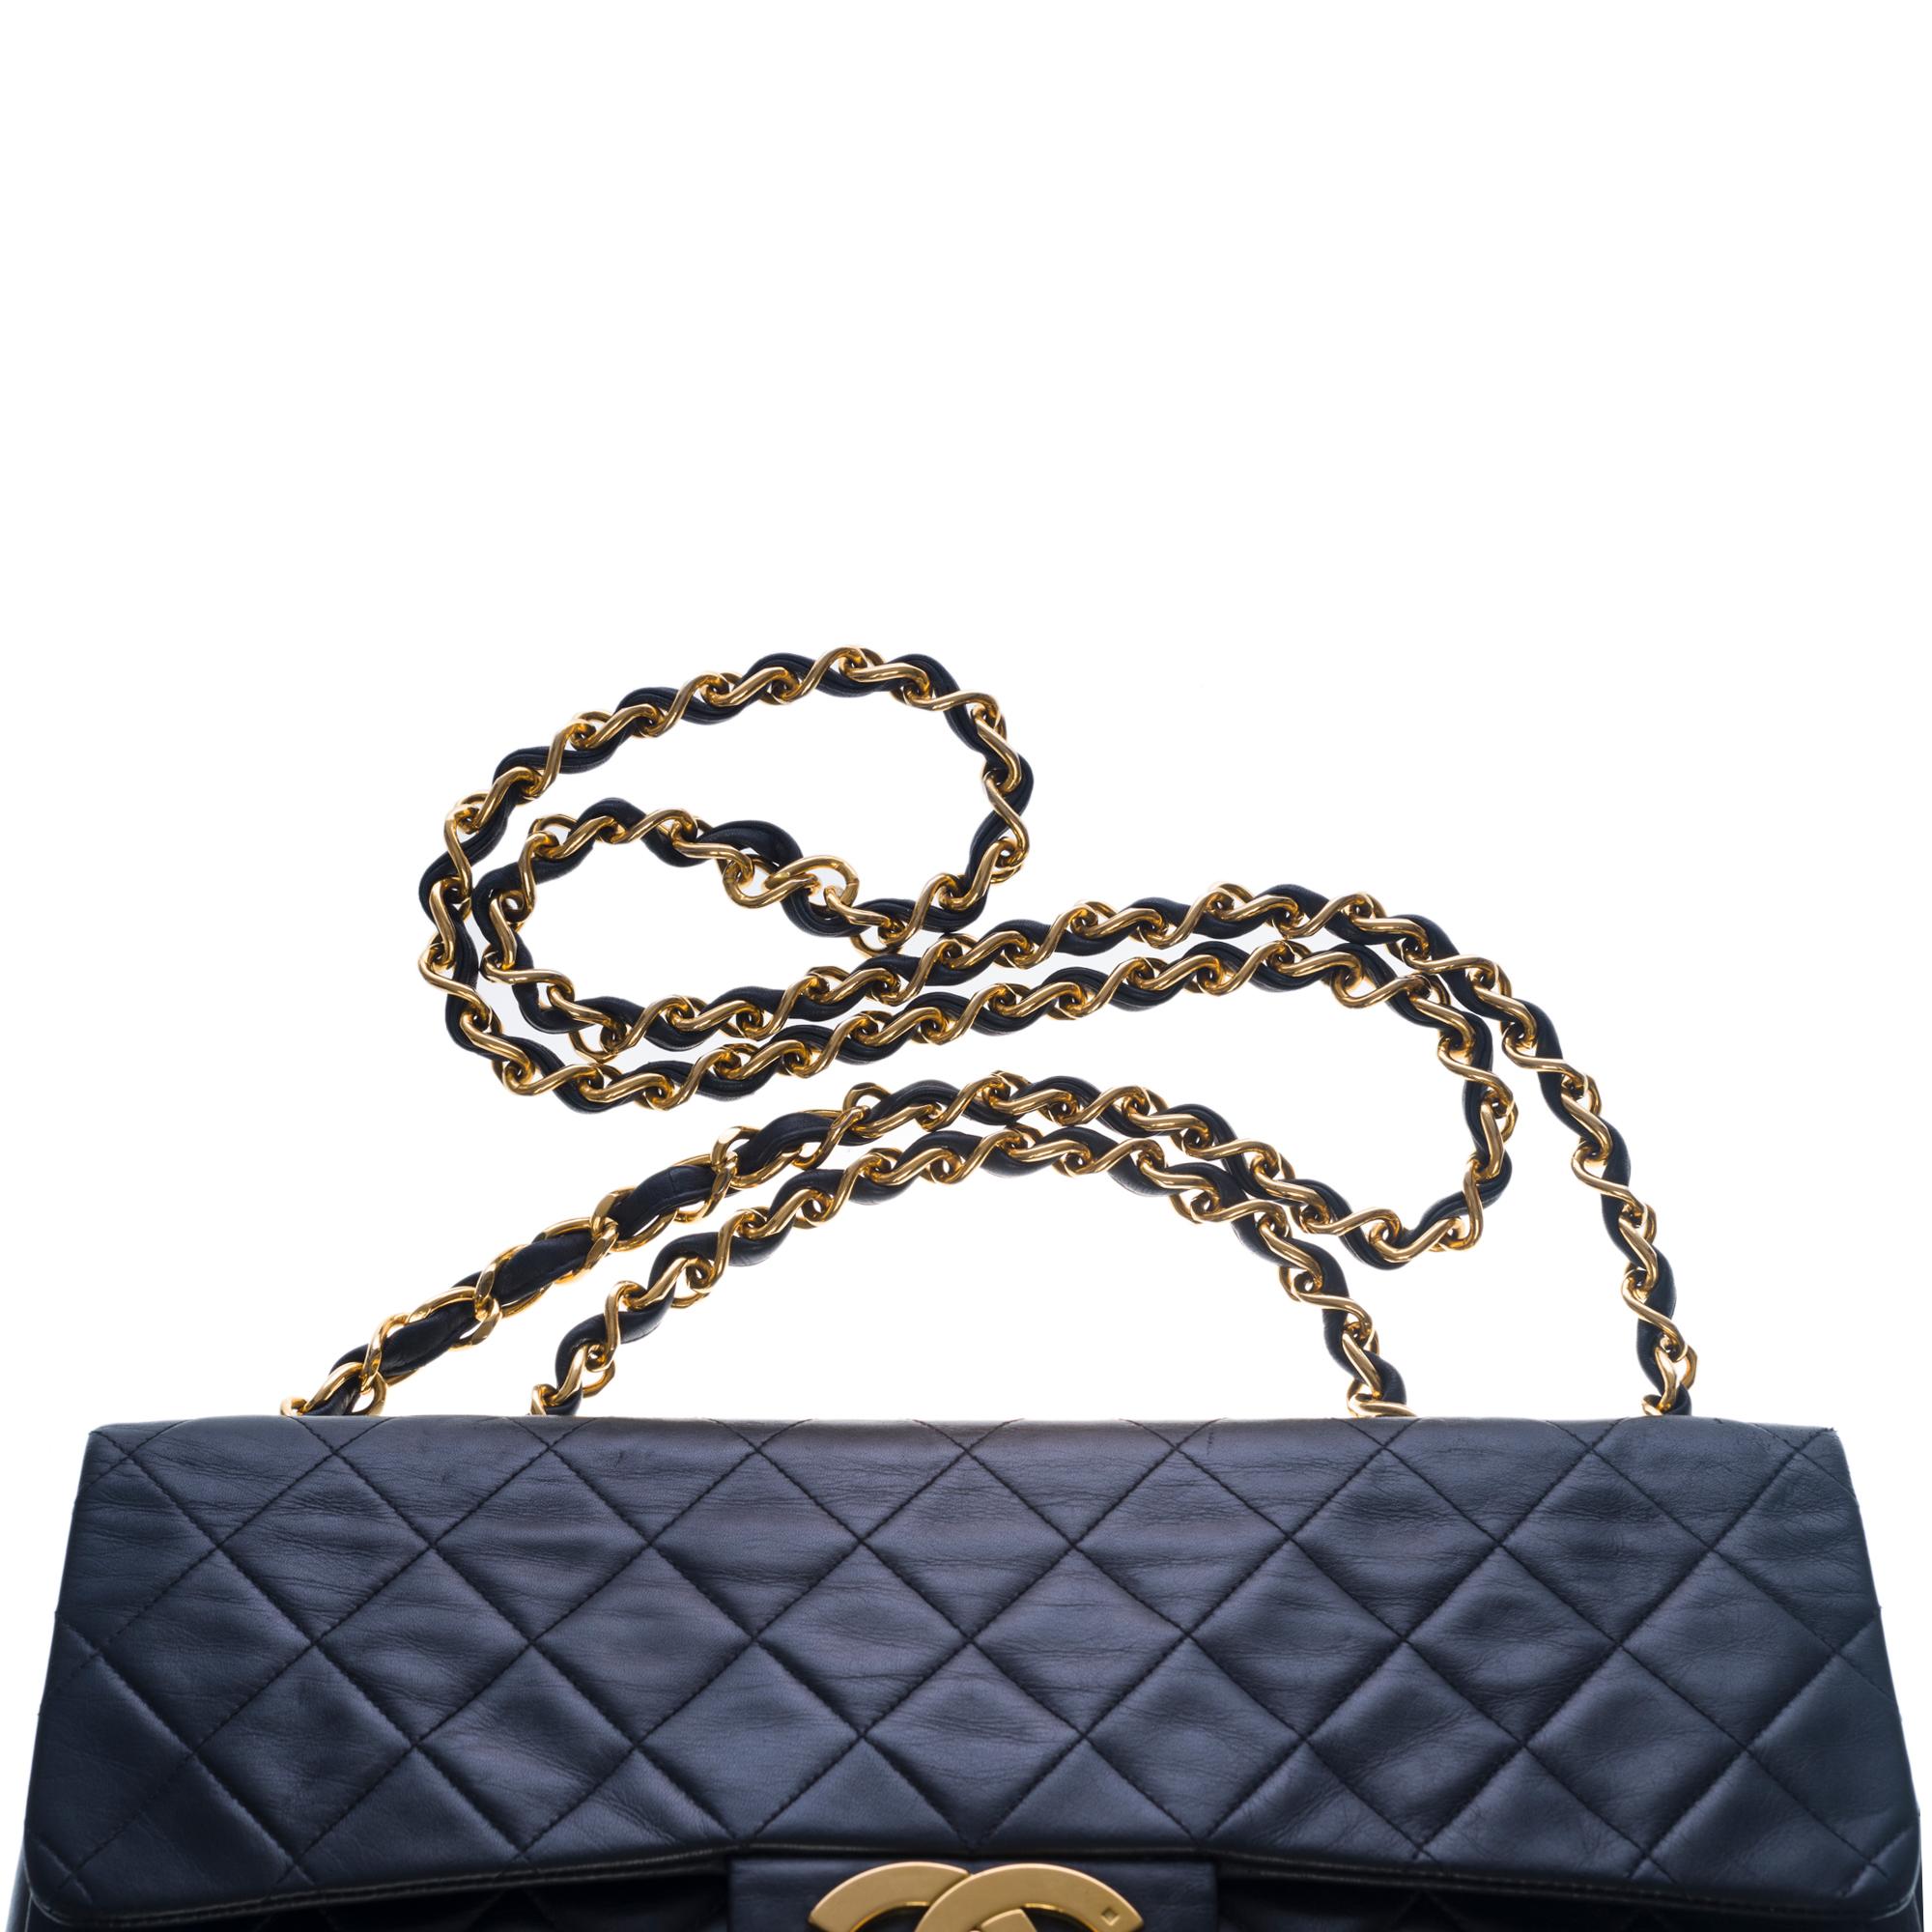 Chanel Timeless Maxi Jumbo flap shoulder bag in black quilted lambskin, GHW 2